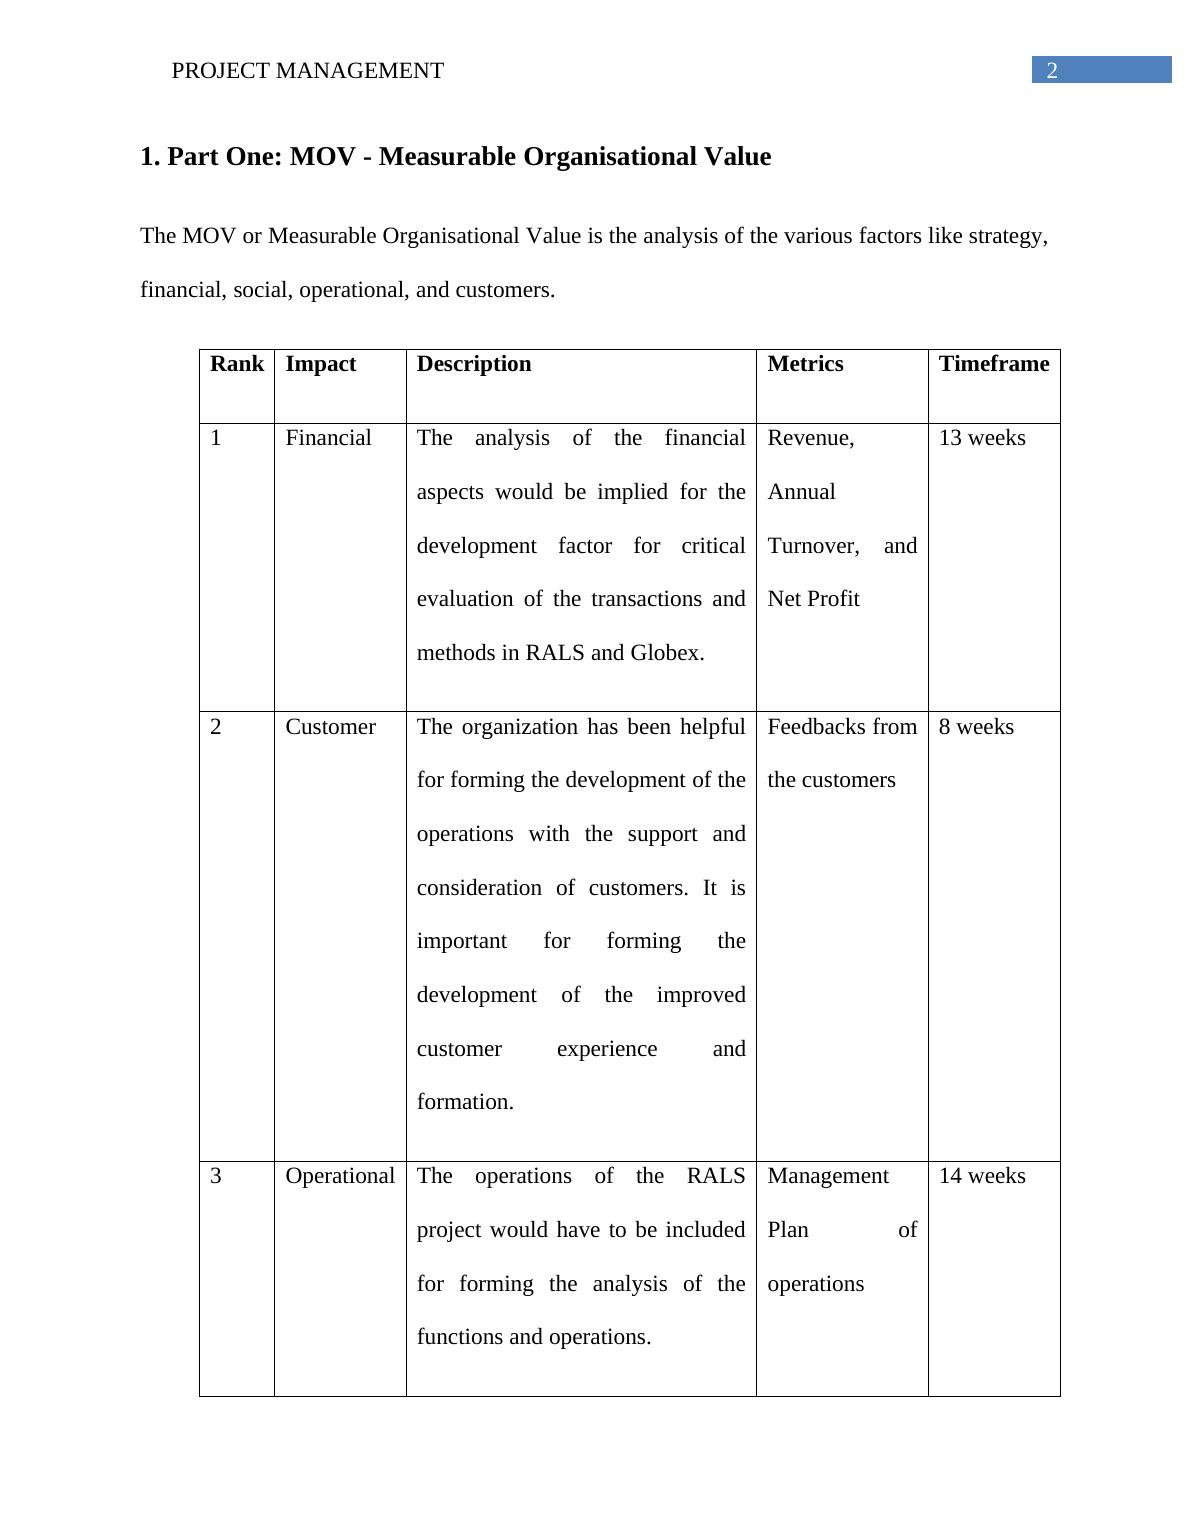 Assignment on Project Management PDF_3